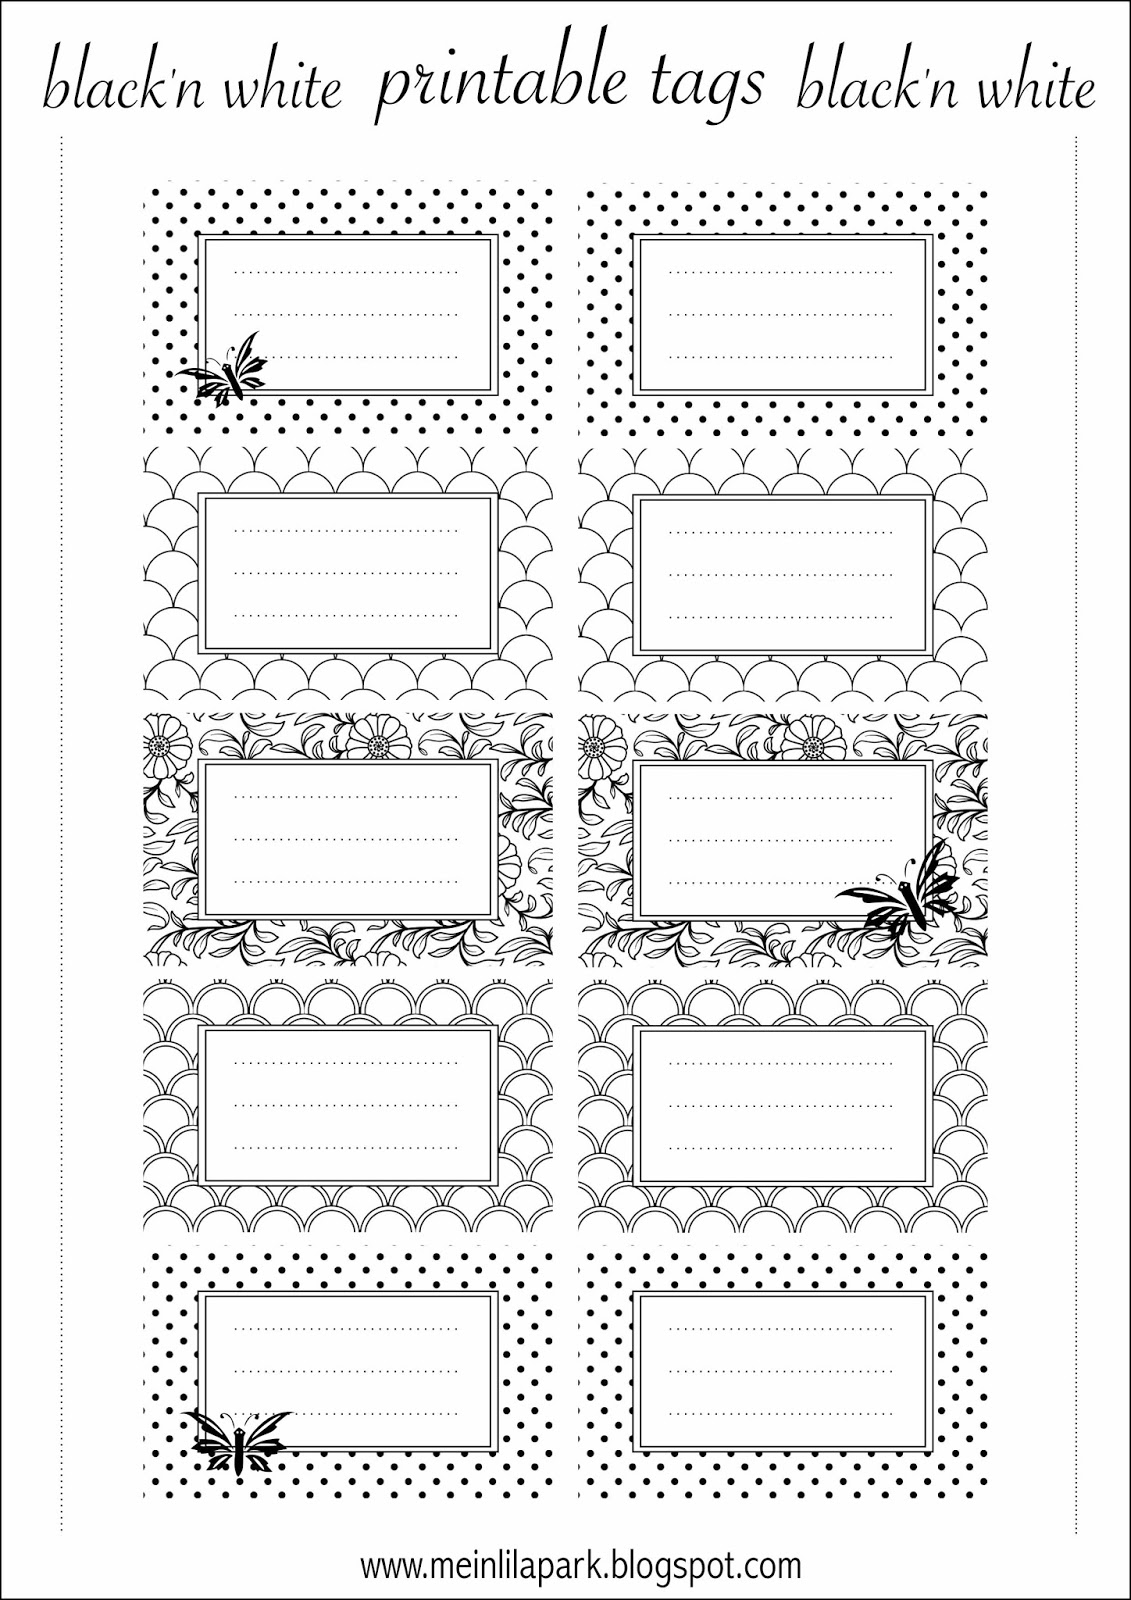 9 Best Images of Black Printable Tags Black and White Printable Gift Tags, Black and White